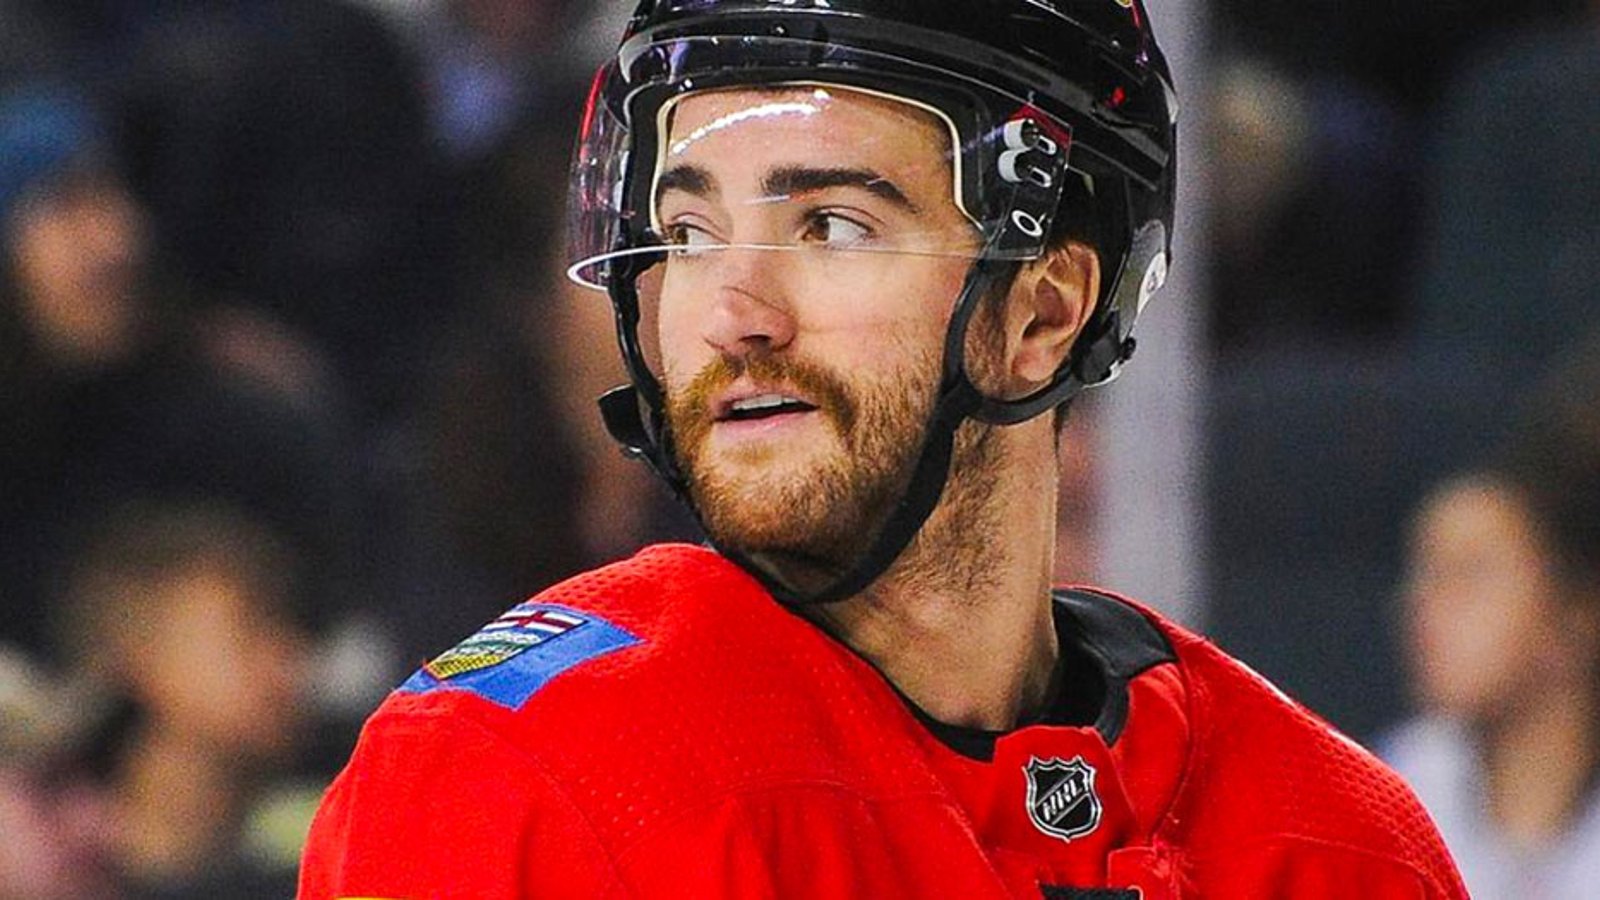 T.J. Brodie recovering at home following scary incident at Flames practice today